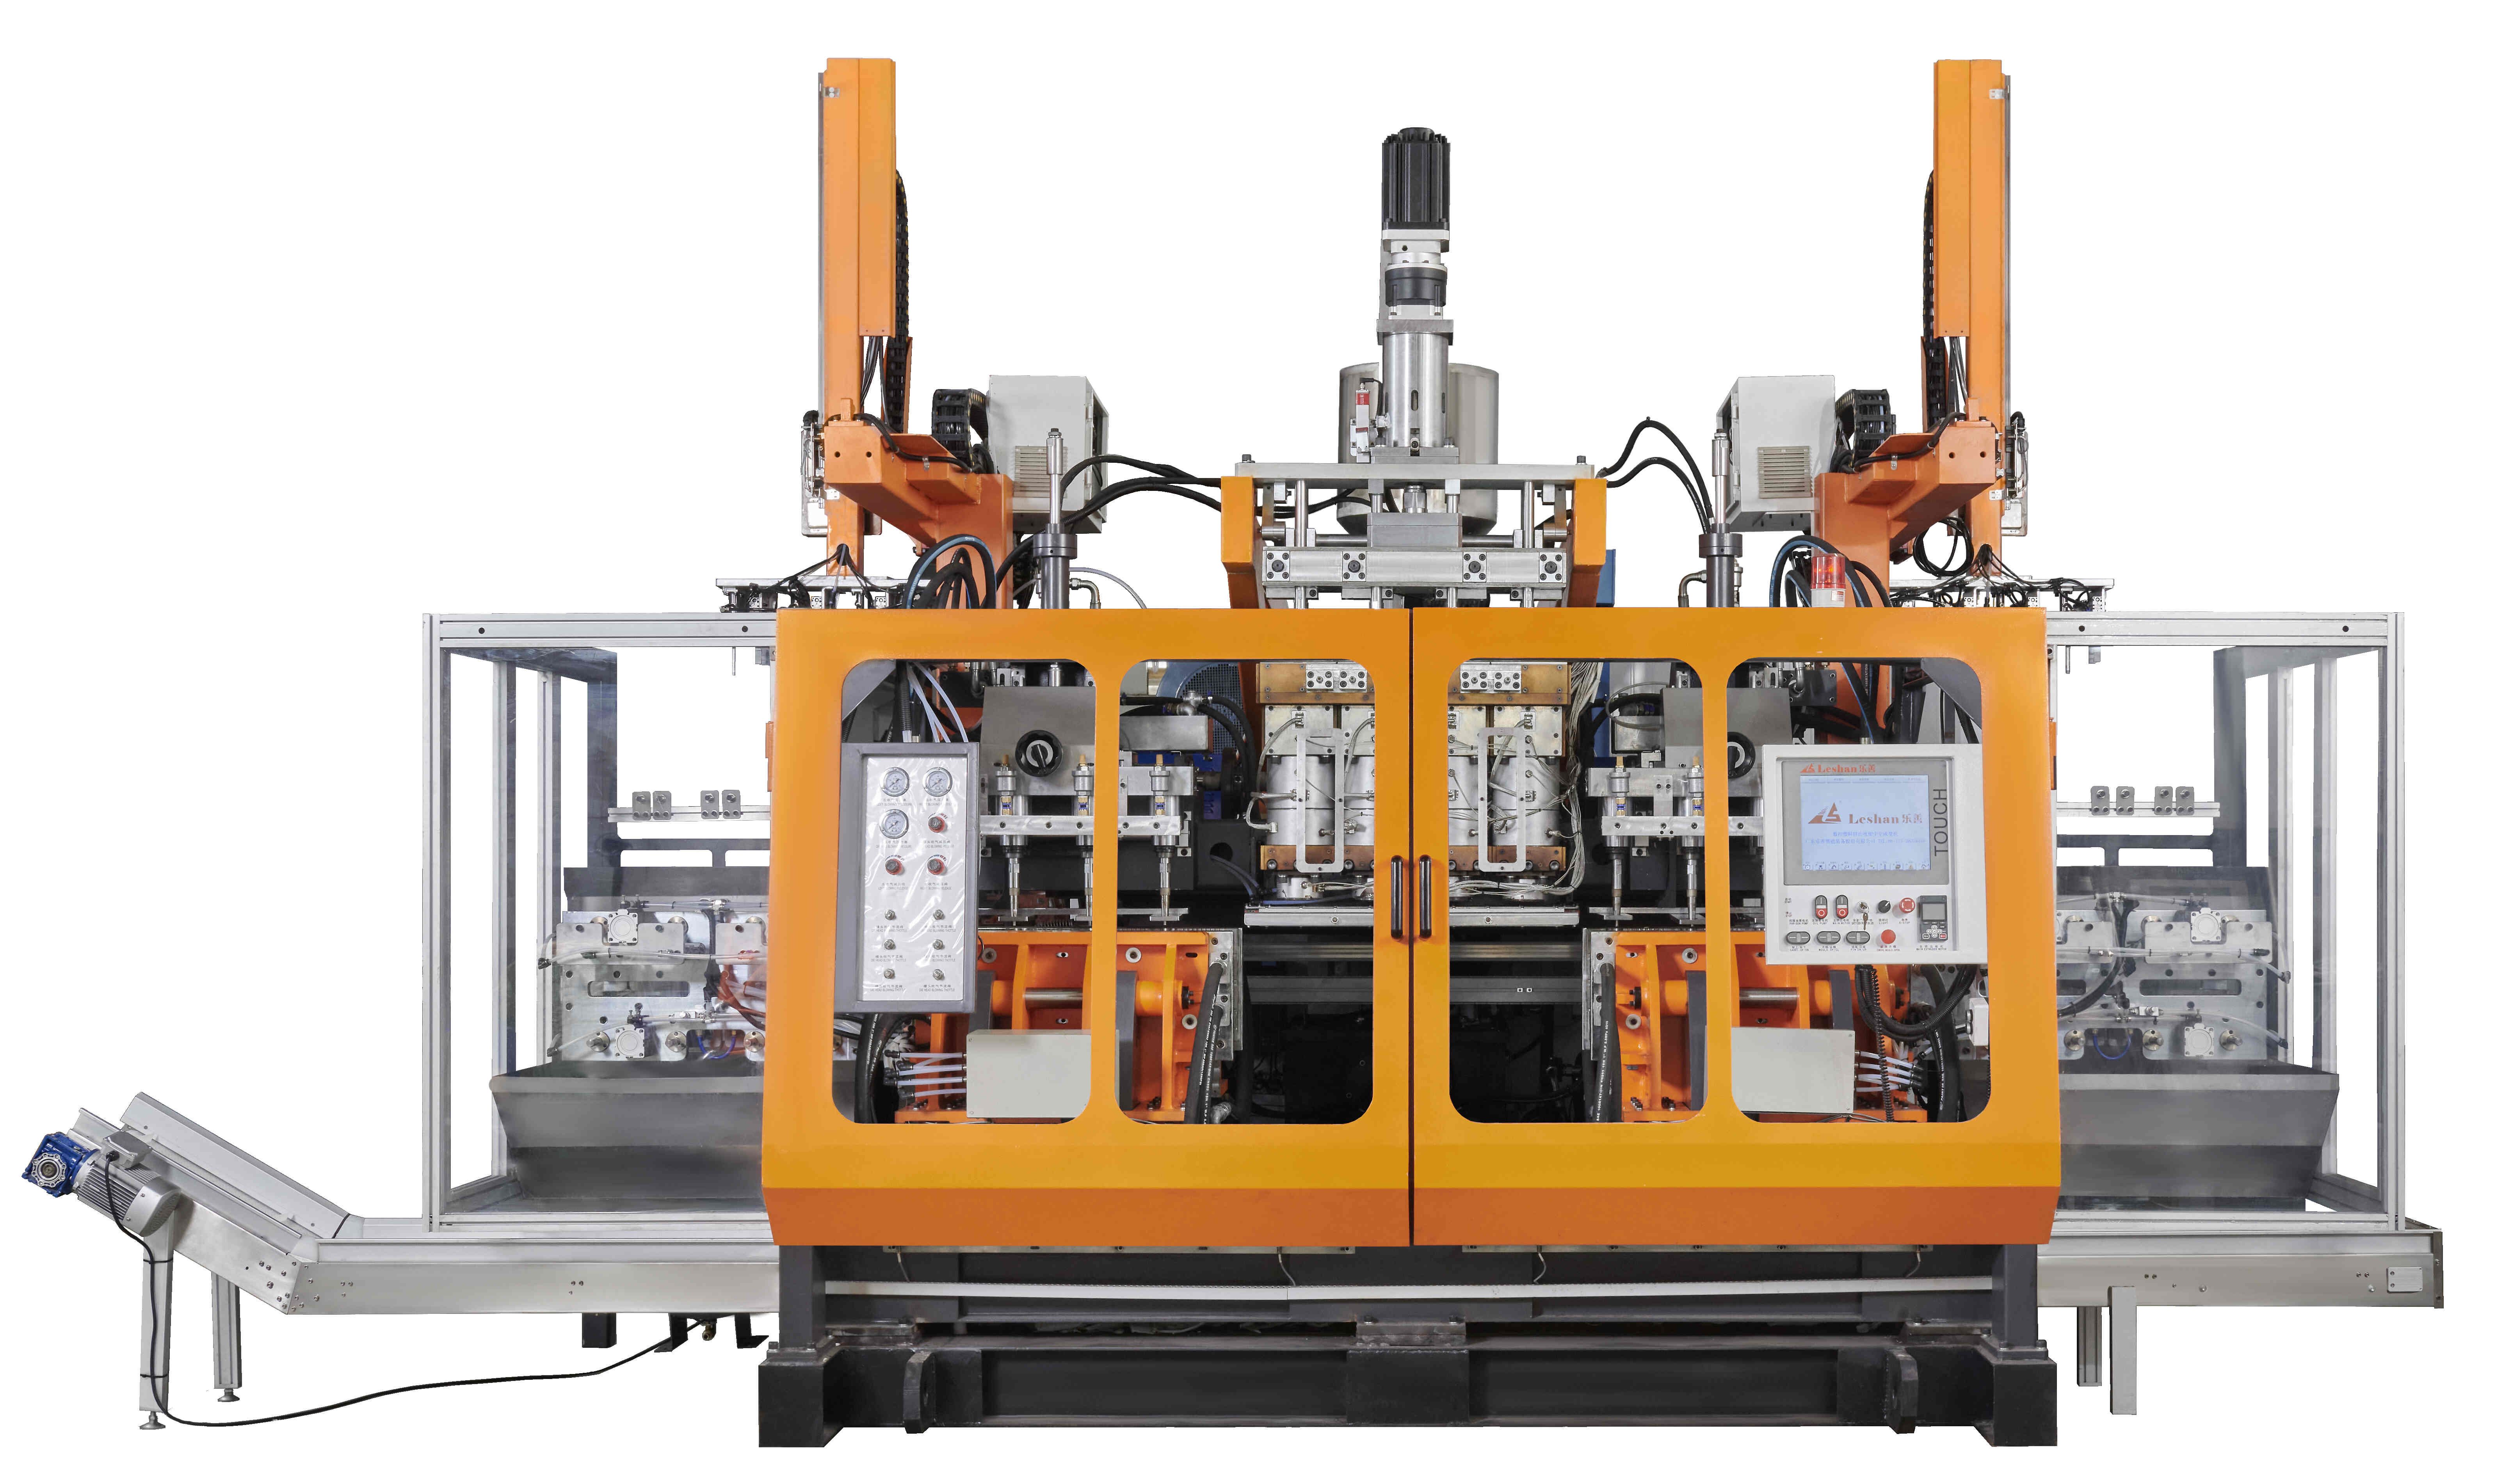 What is the noise level of the continuous extrusion blow molding machine?